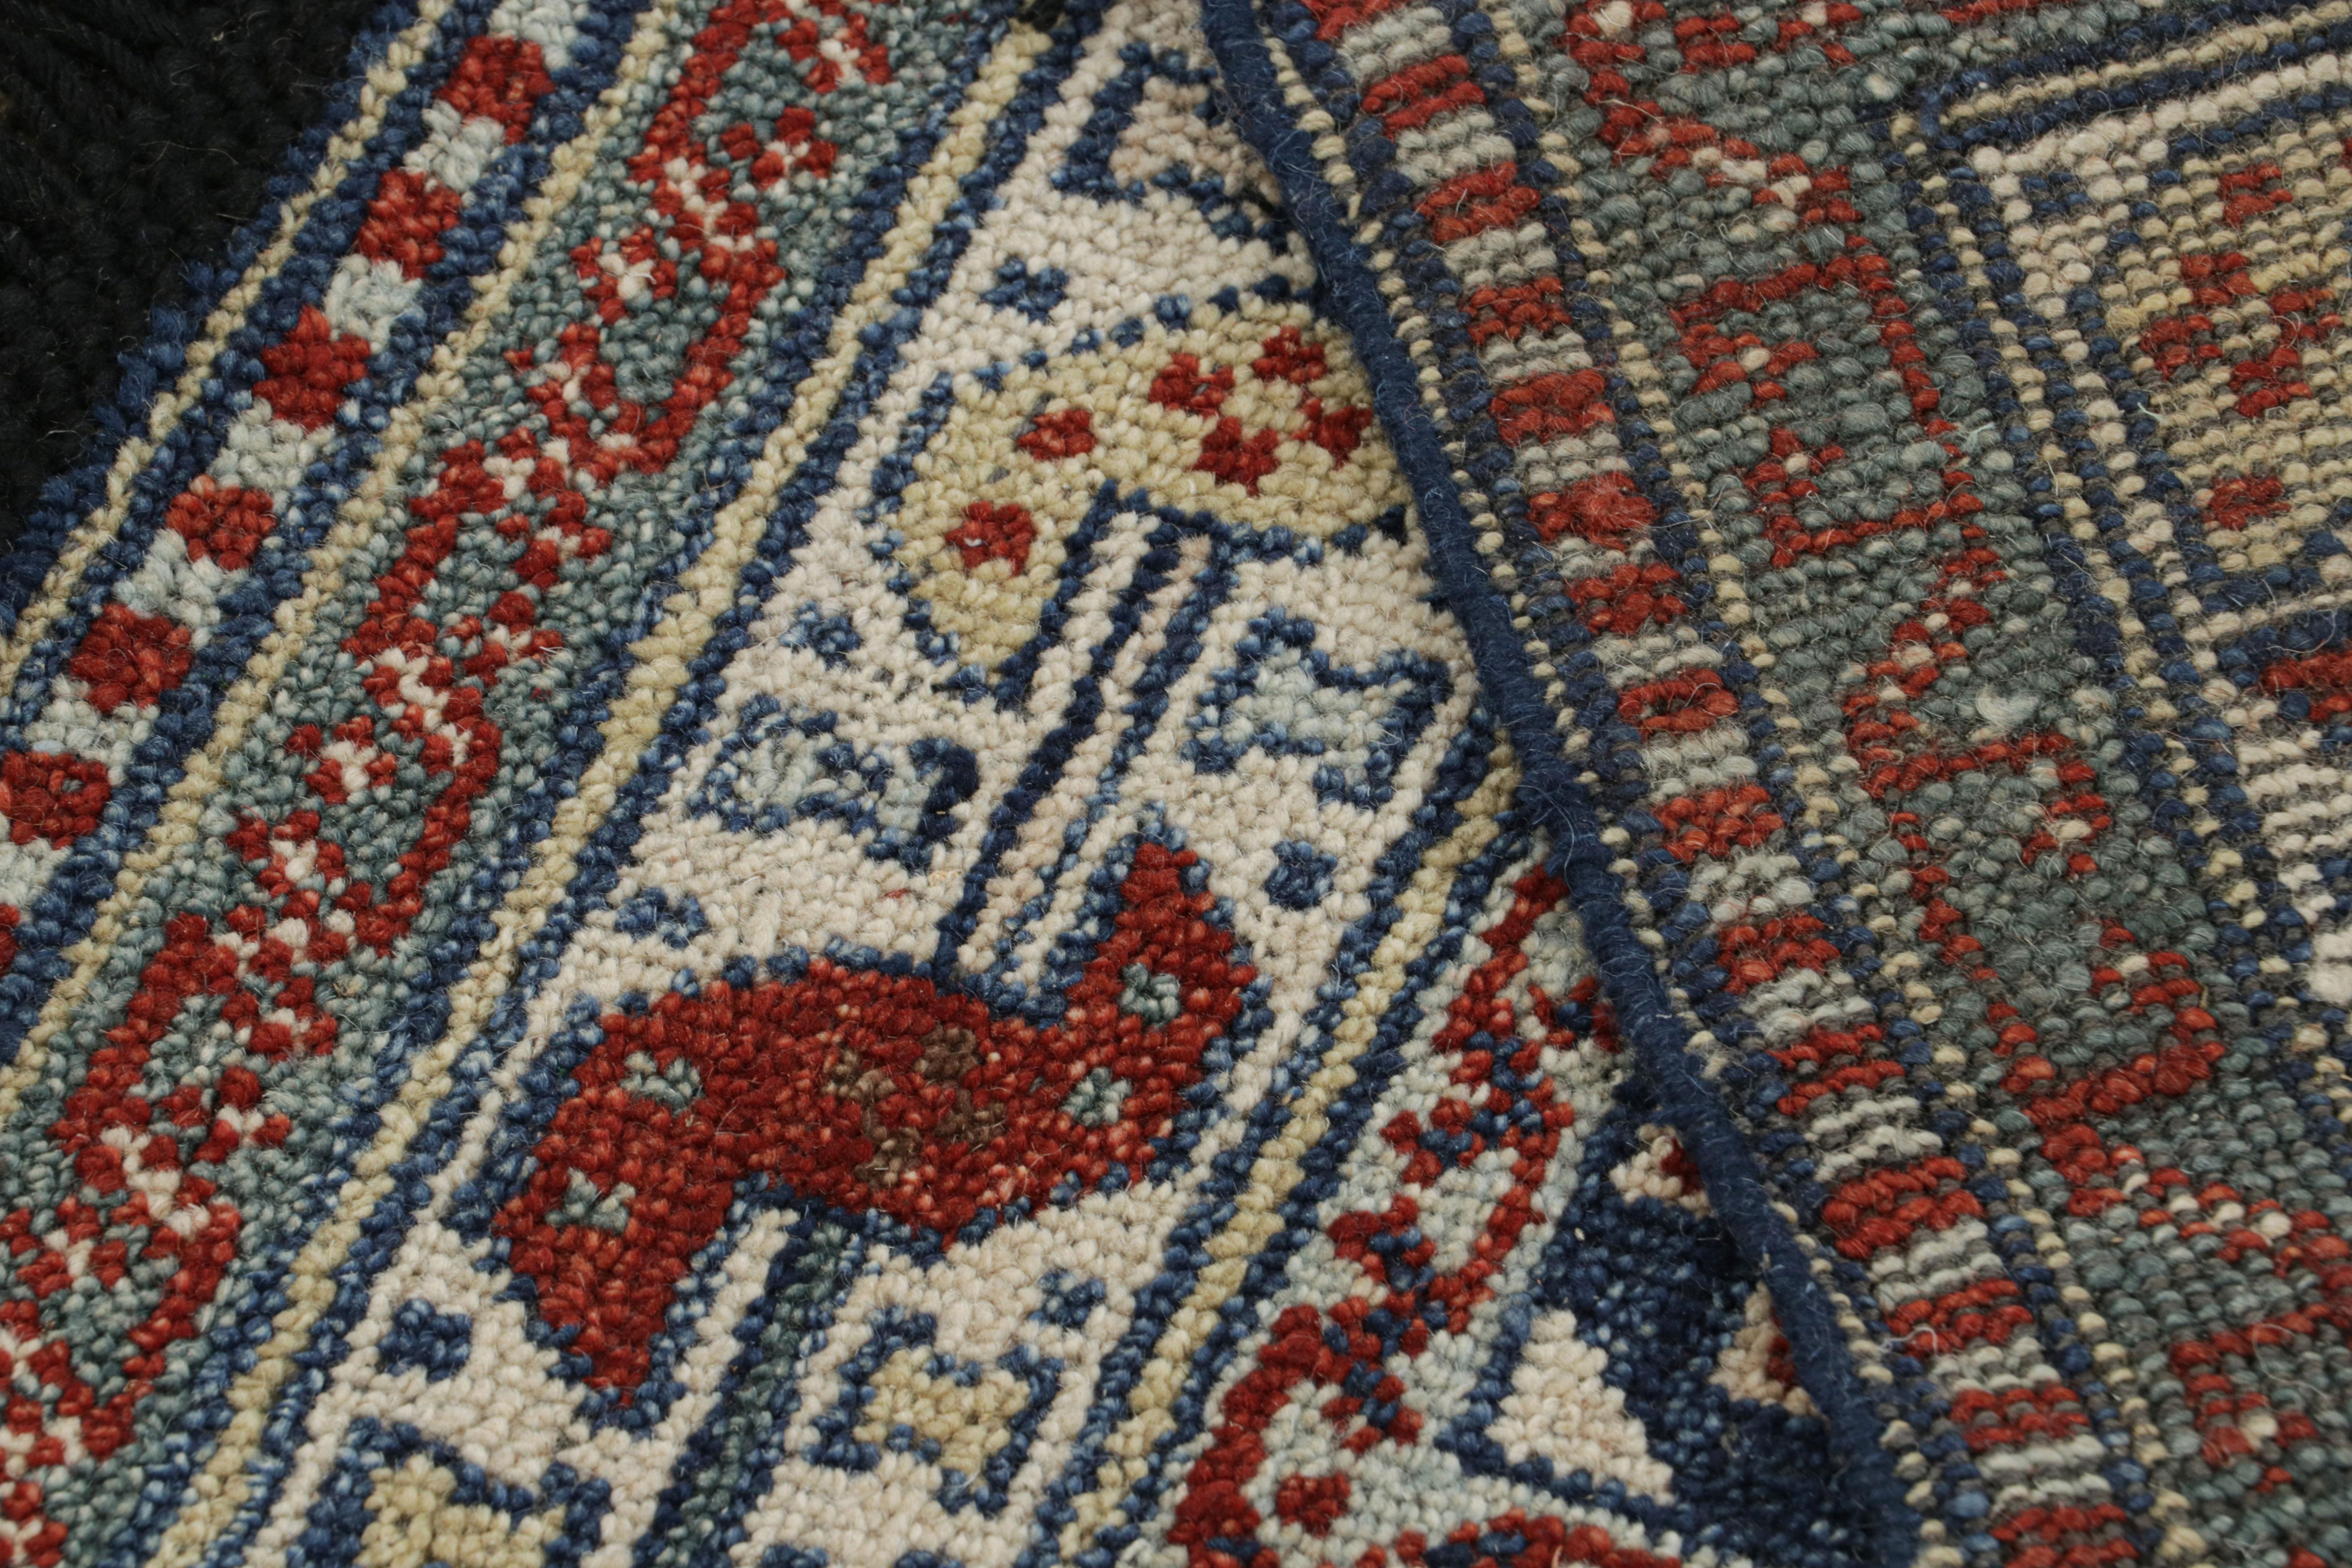 Wool Rug & Kilim’s Blue Tribal Style Square Rug with Primitivist Geometric Patterns For Sale